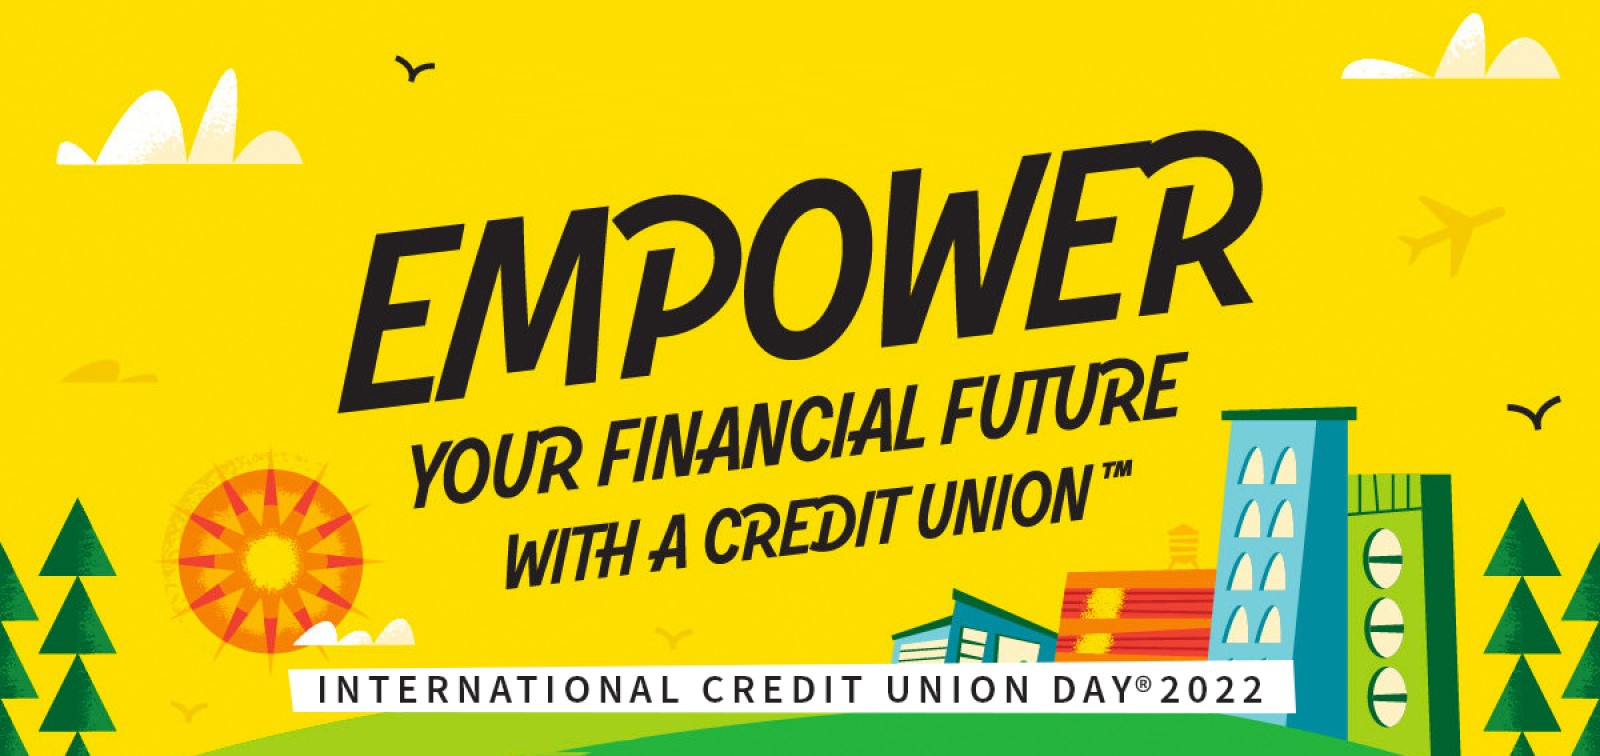 Empower Your Financial Future with a Credit Union